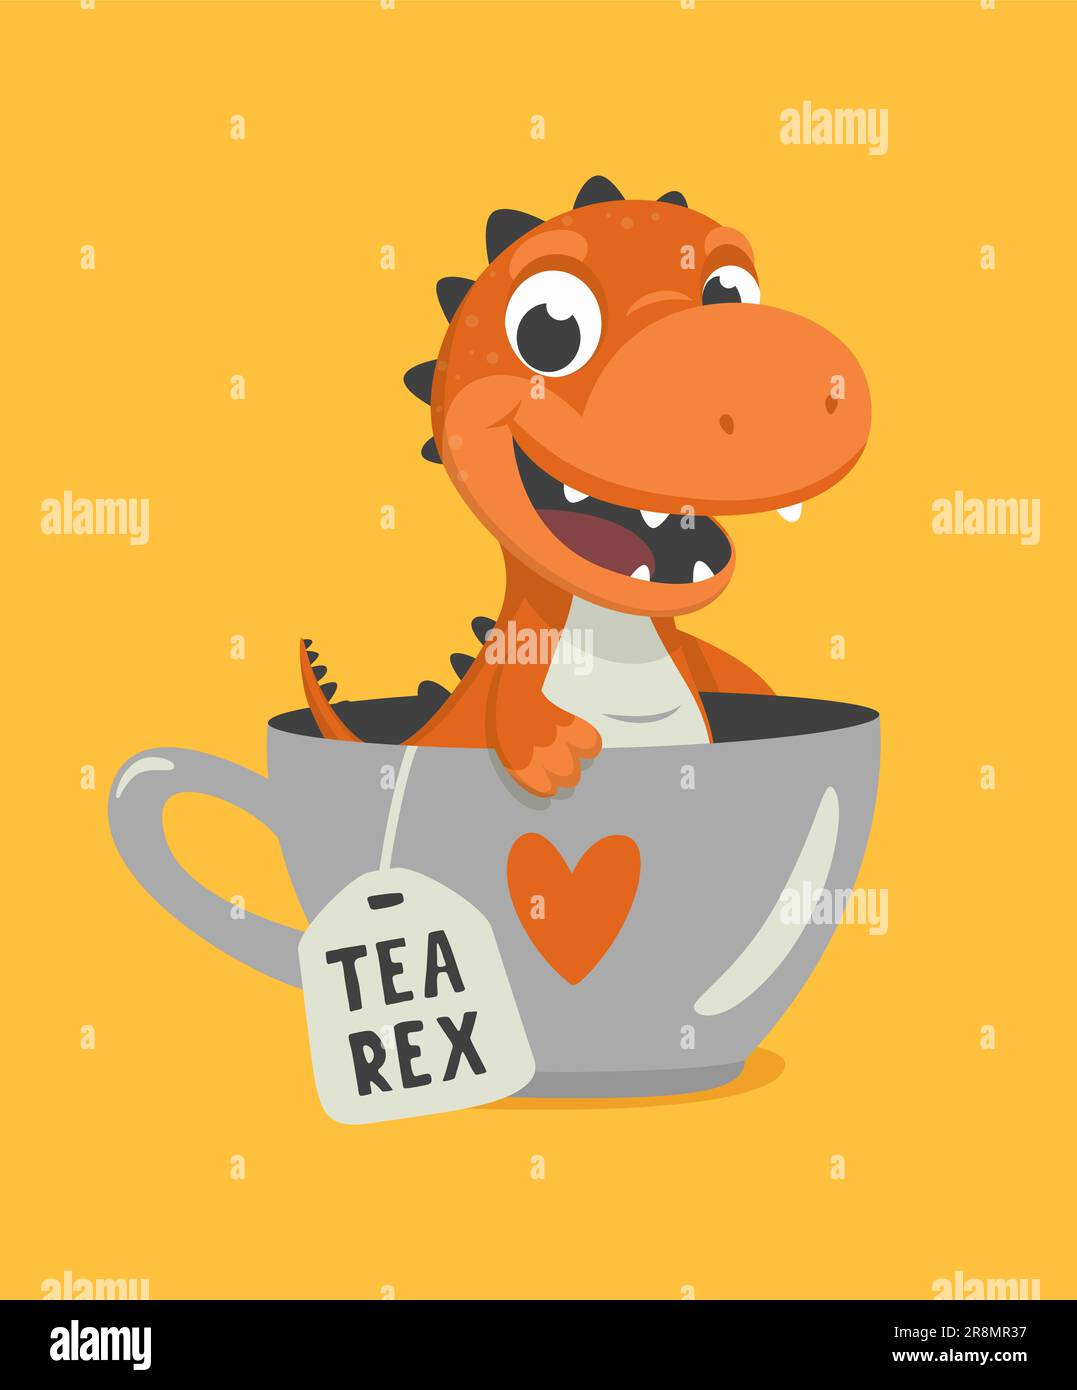 Vector Cute and Funny Cartoon Hand Drawn Dinosaur Drinking Hot Tea Beverage, Holding Cup of Tea. Kids, Children s Illustration, Print Stock Vector